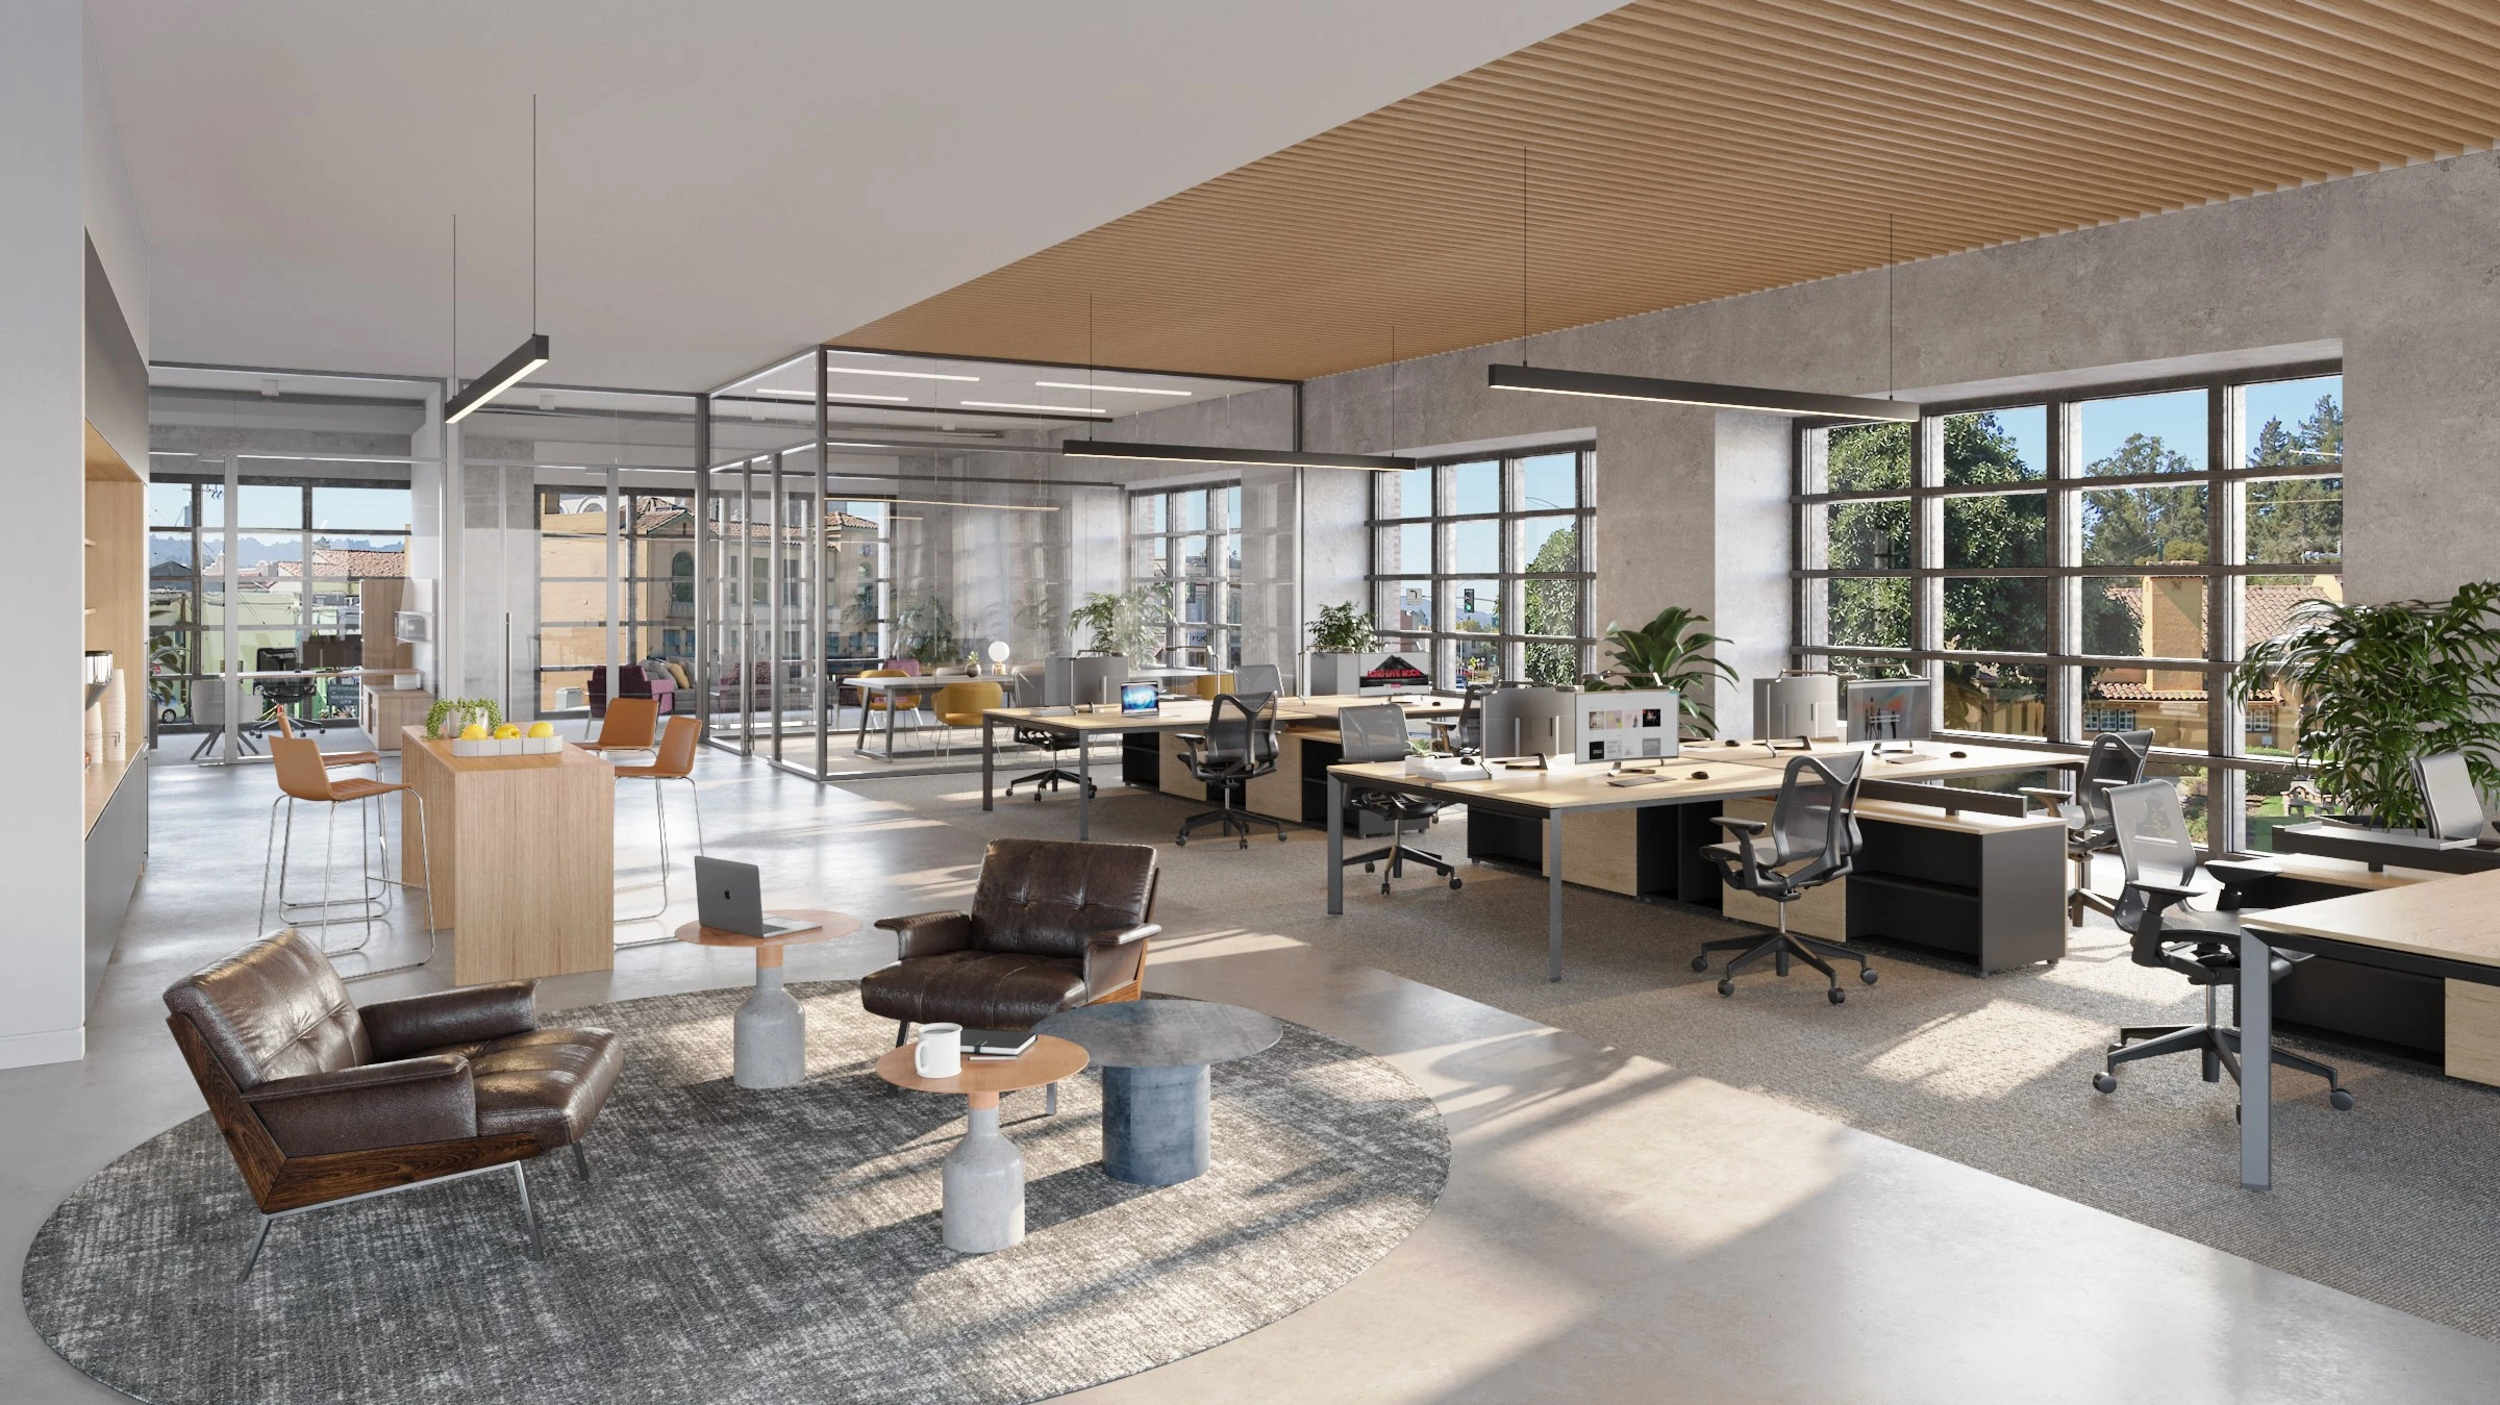 250 California Drive office space, rendering by MBH Architects